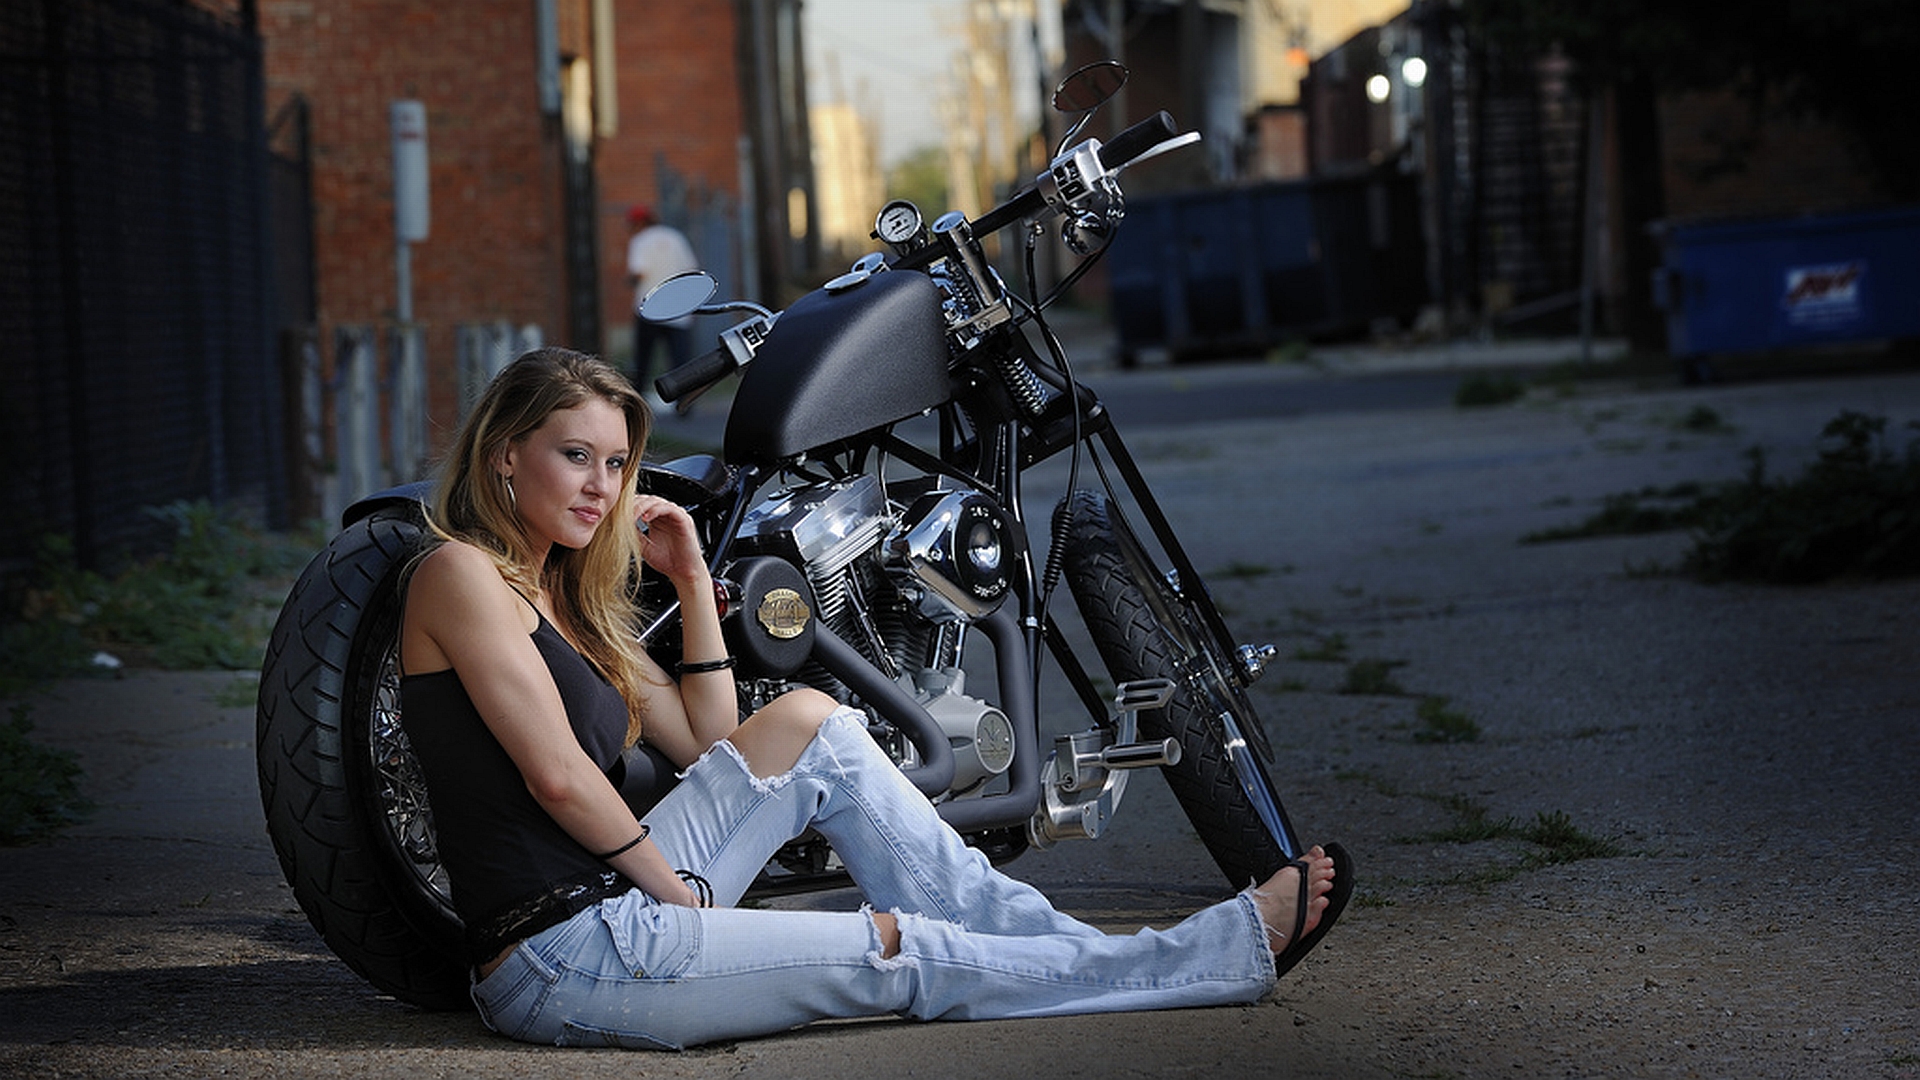 girls and motorcycles Wallpaper Background 44652